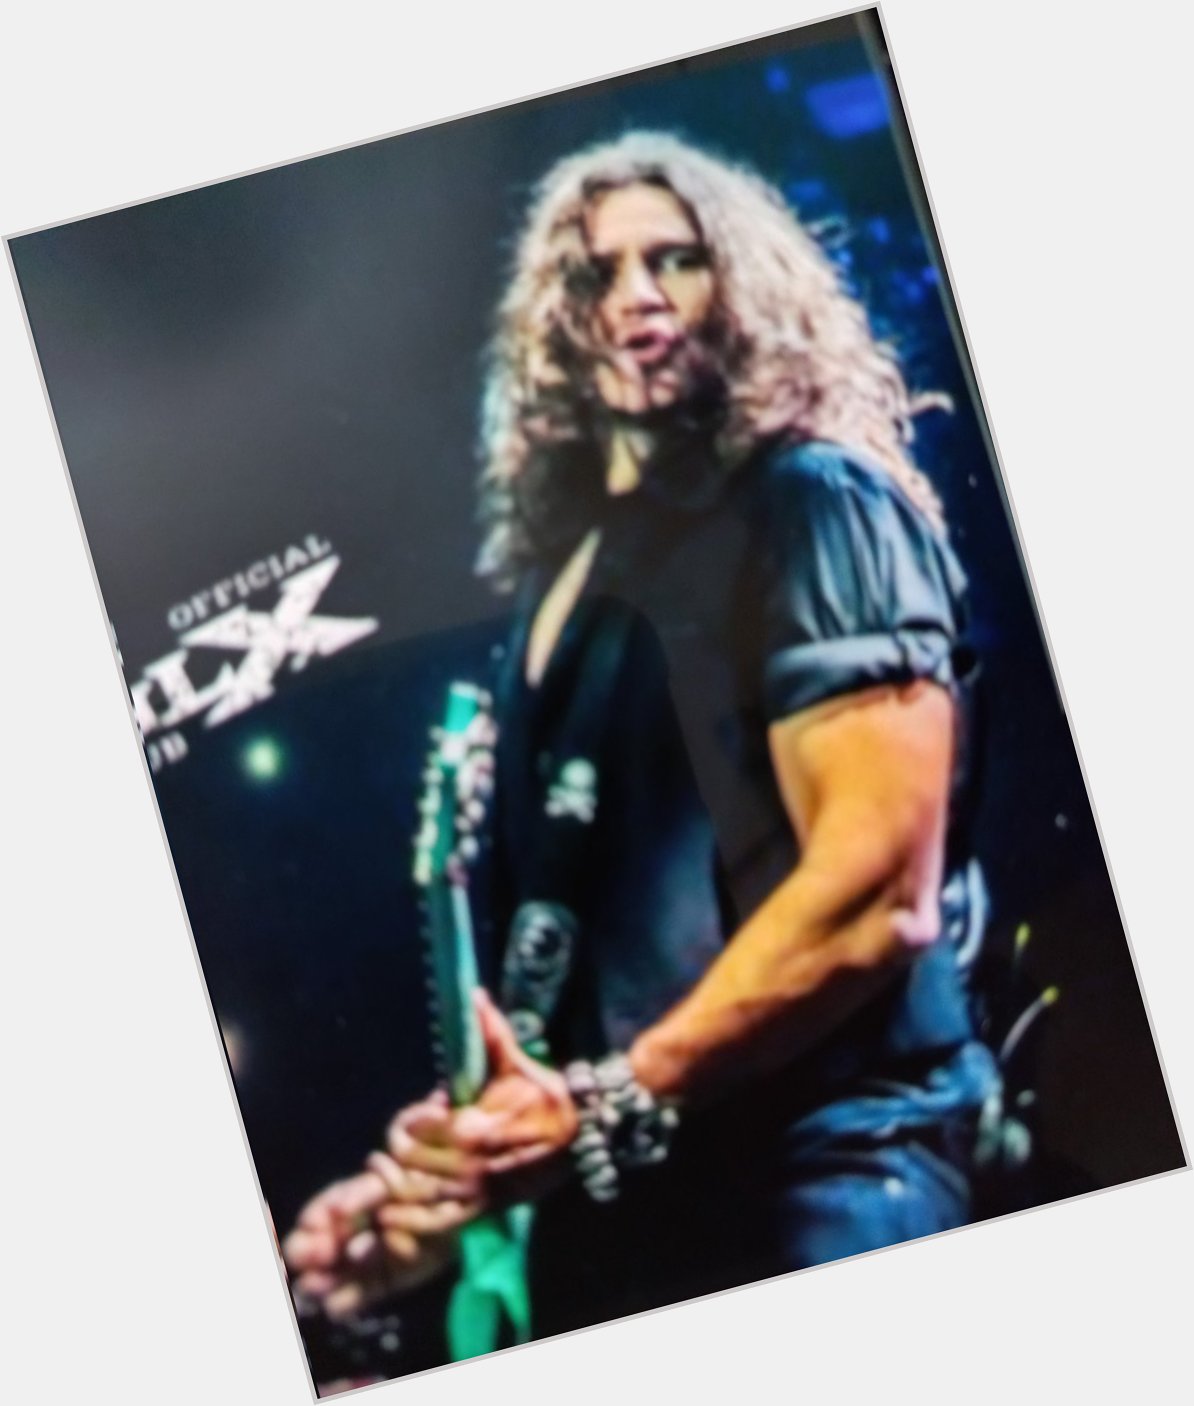   May you have a very happy day with your family! Happy birthday Phil X, you rock!    